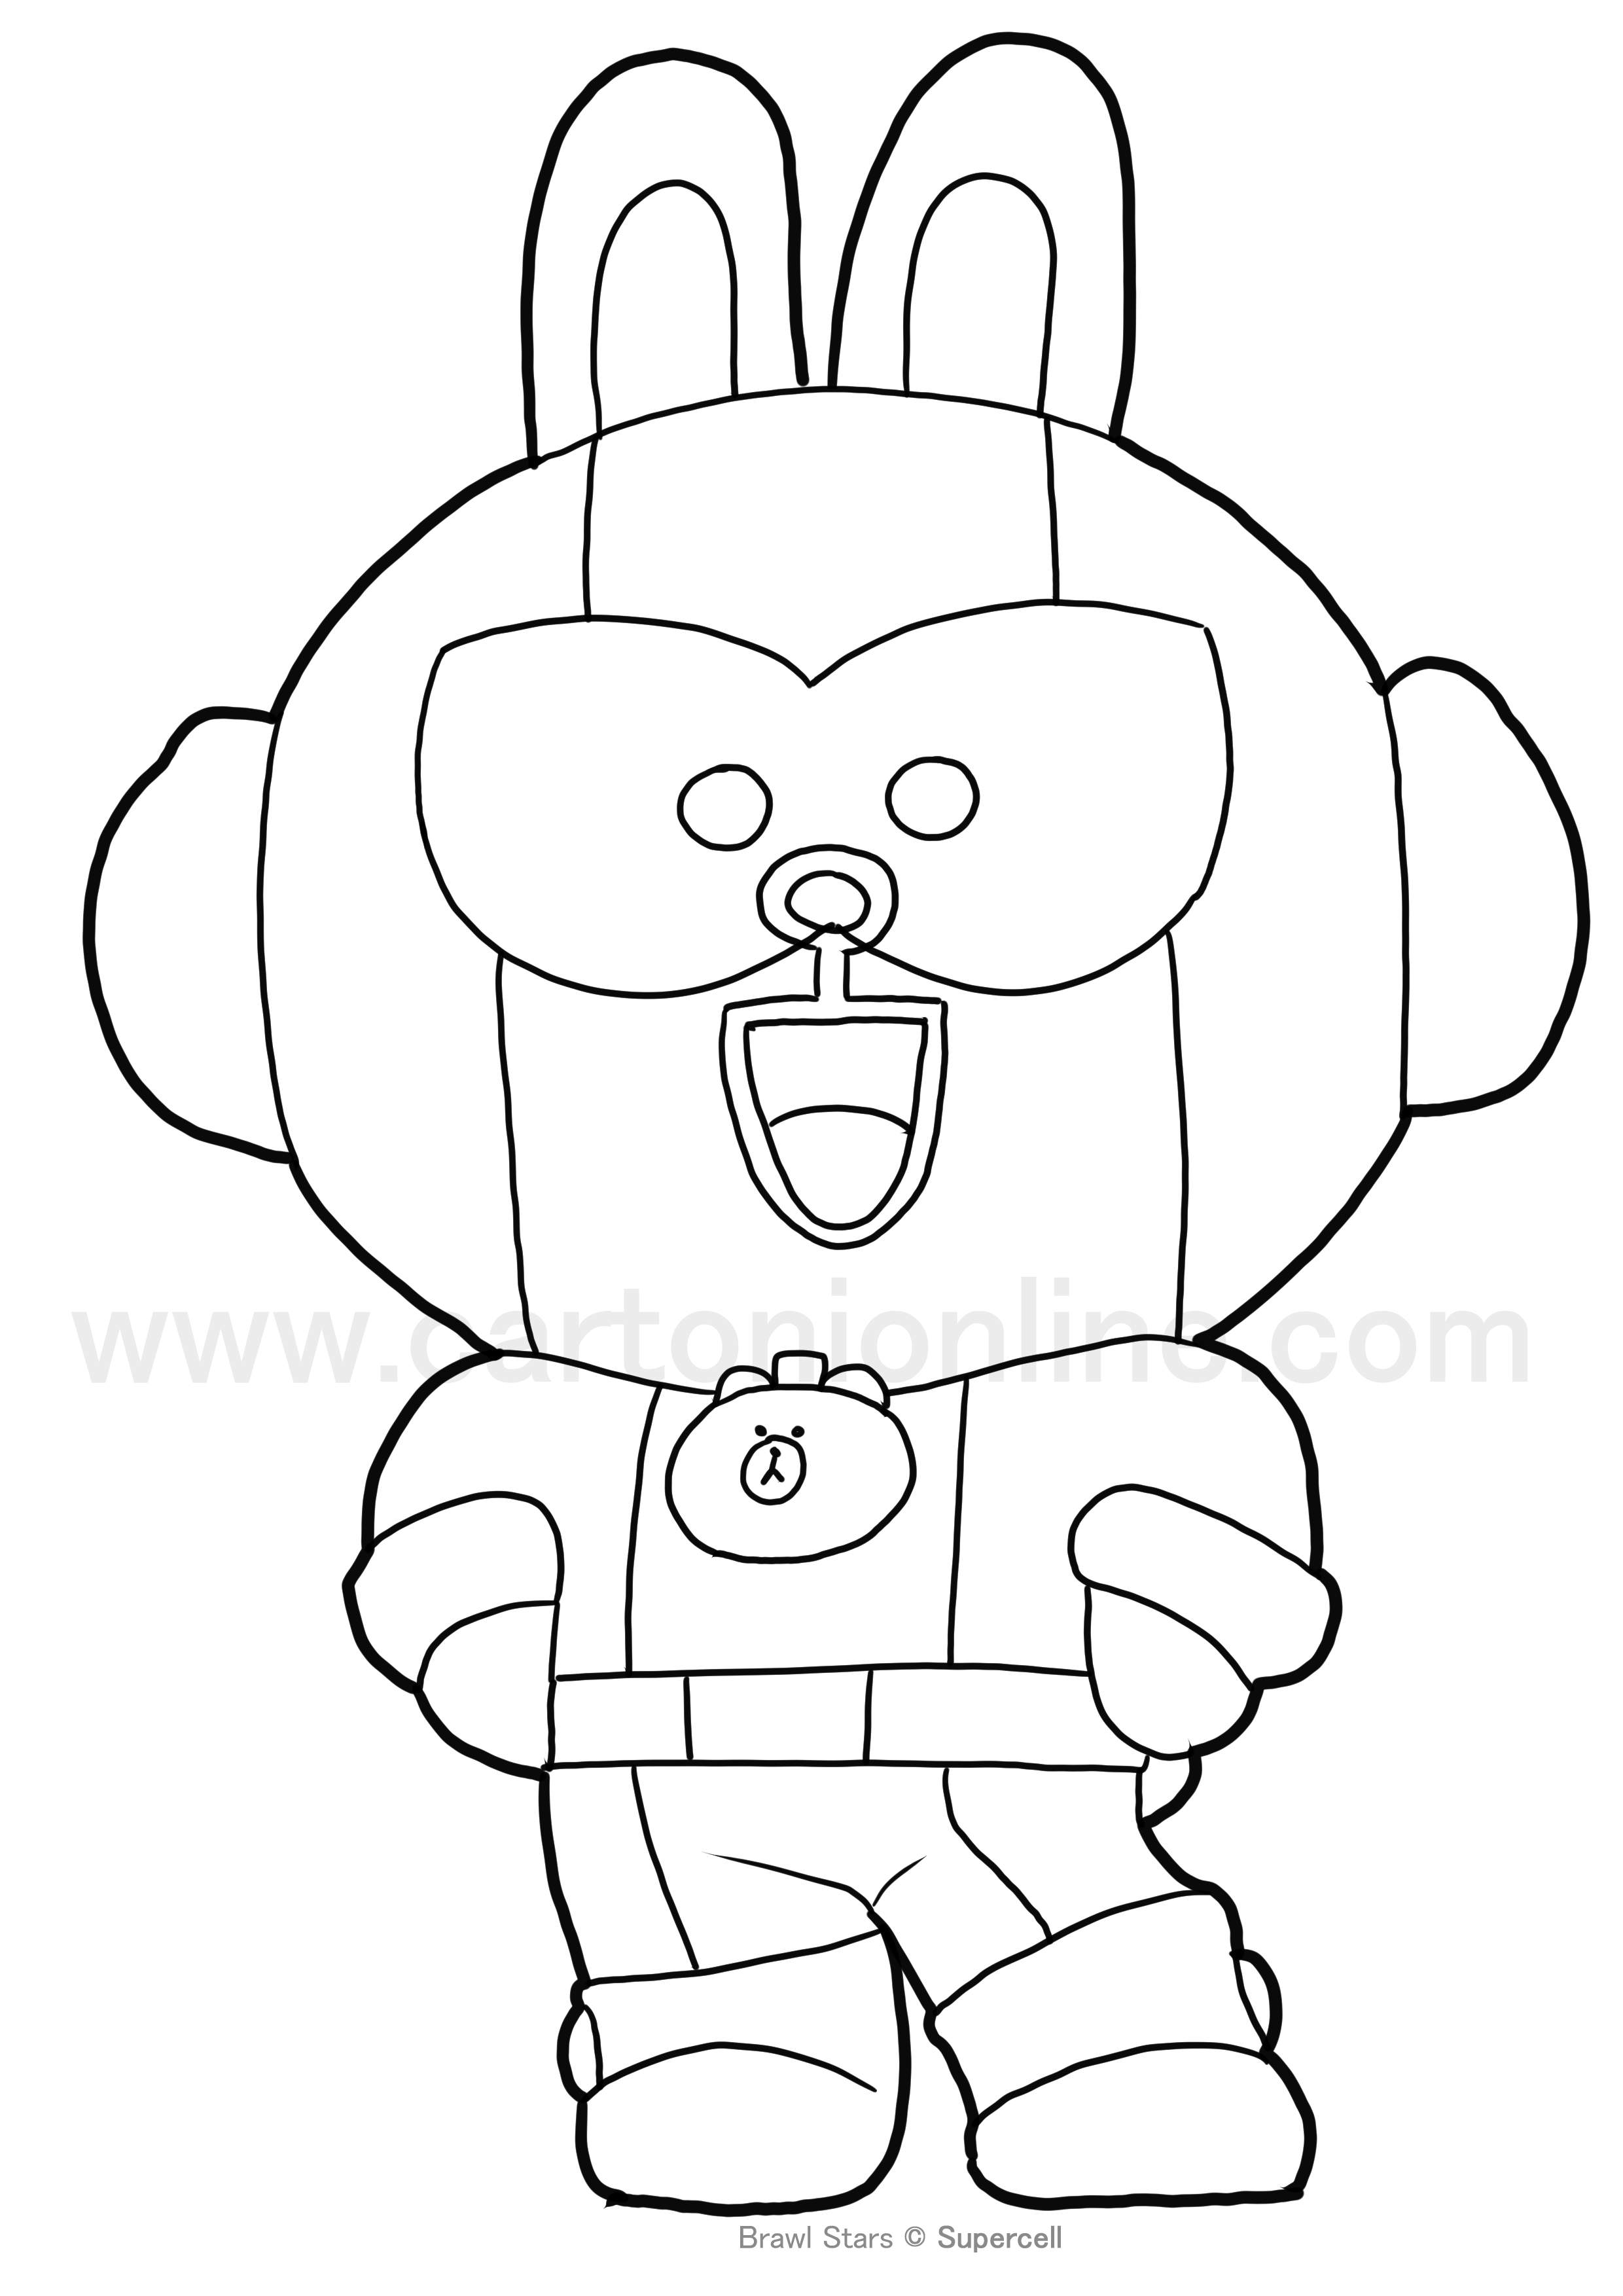 Cony Max from Brawl Stars coloring page to print and coloring